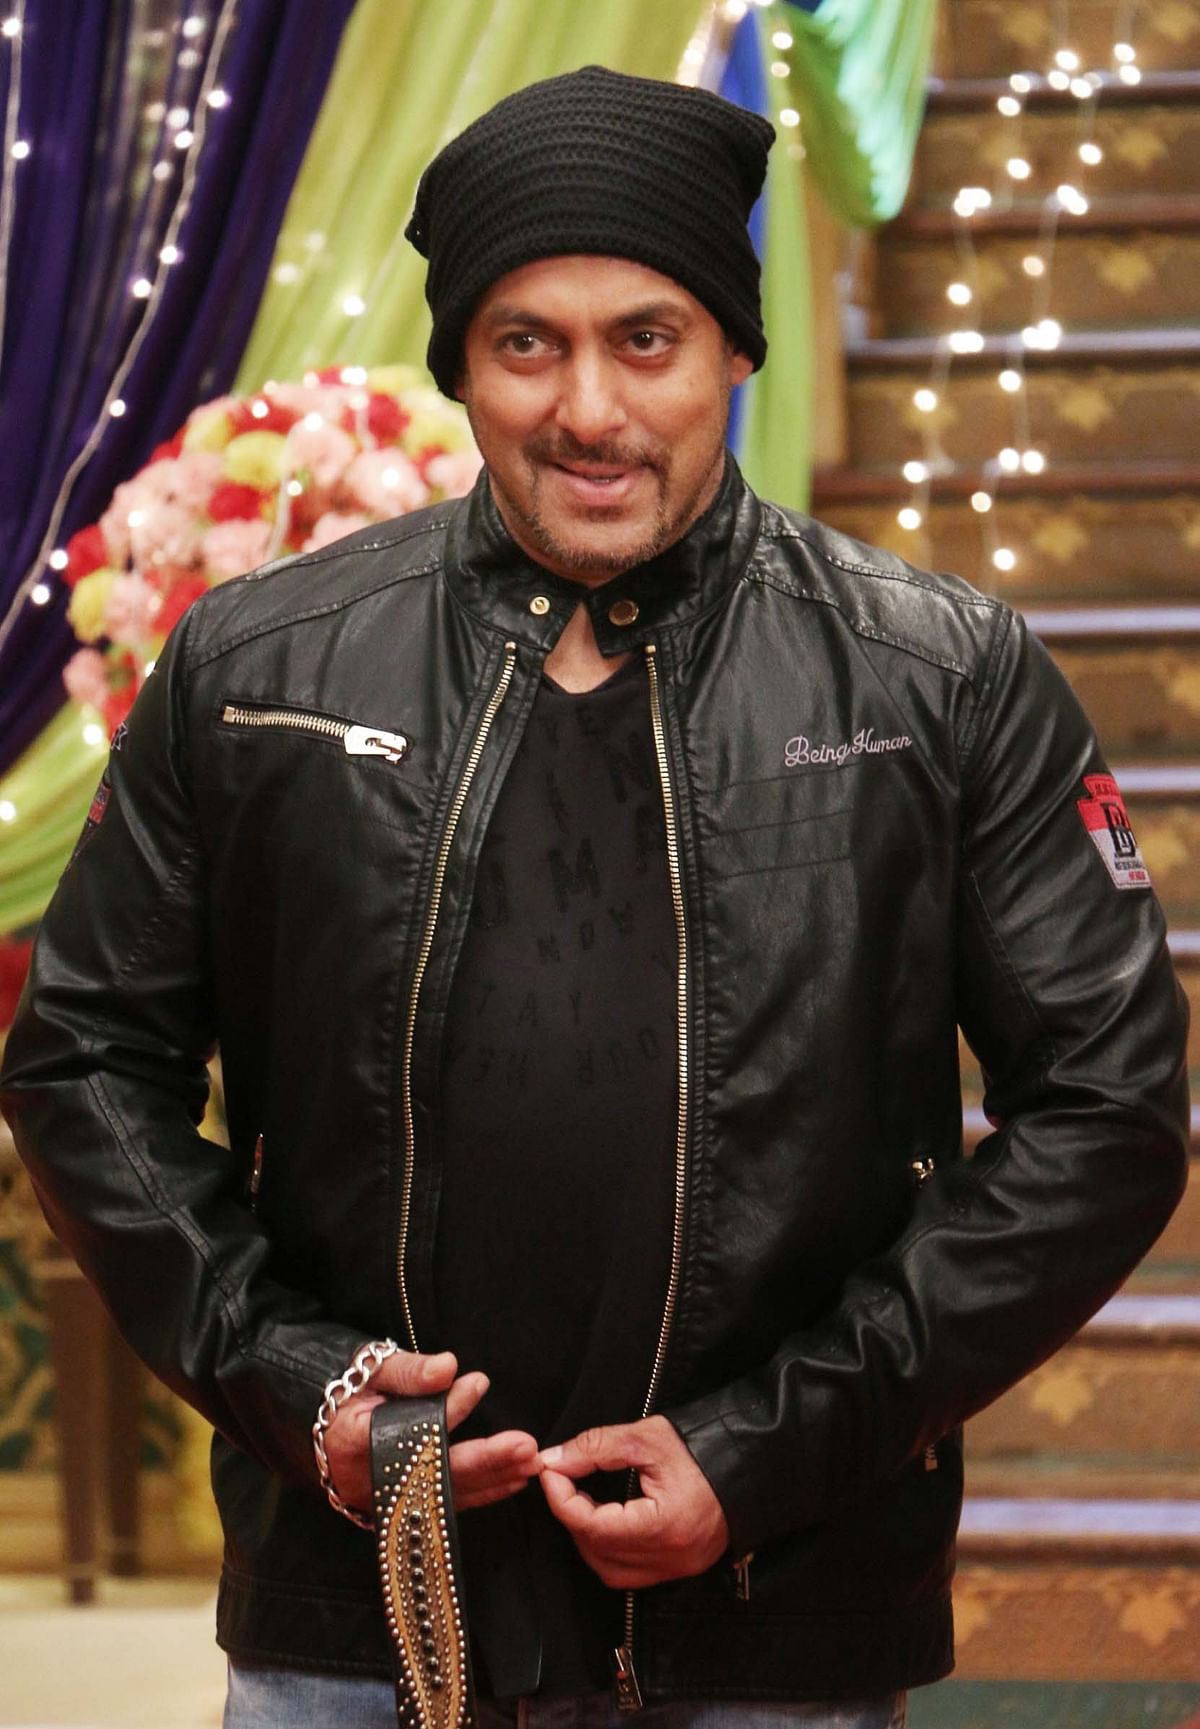 Salman Khan wants to be a good guy on screen for his fans, and more stories